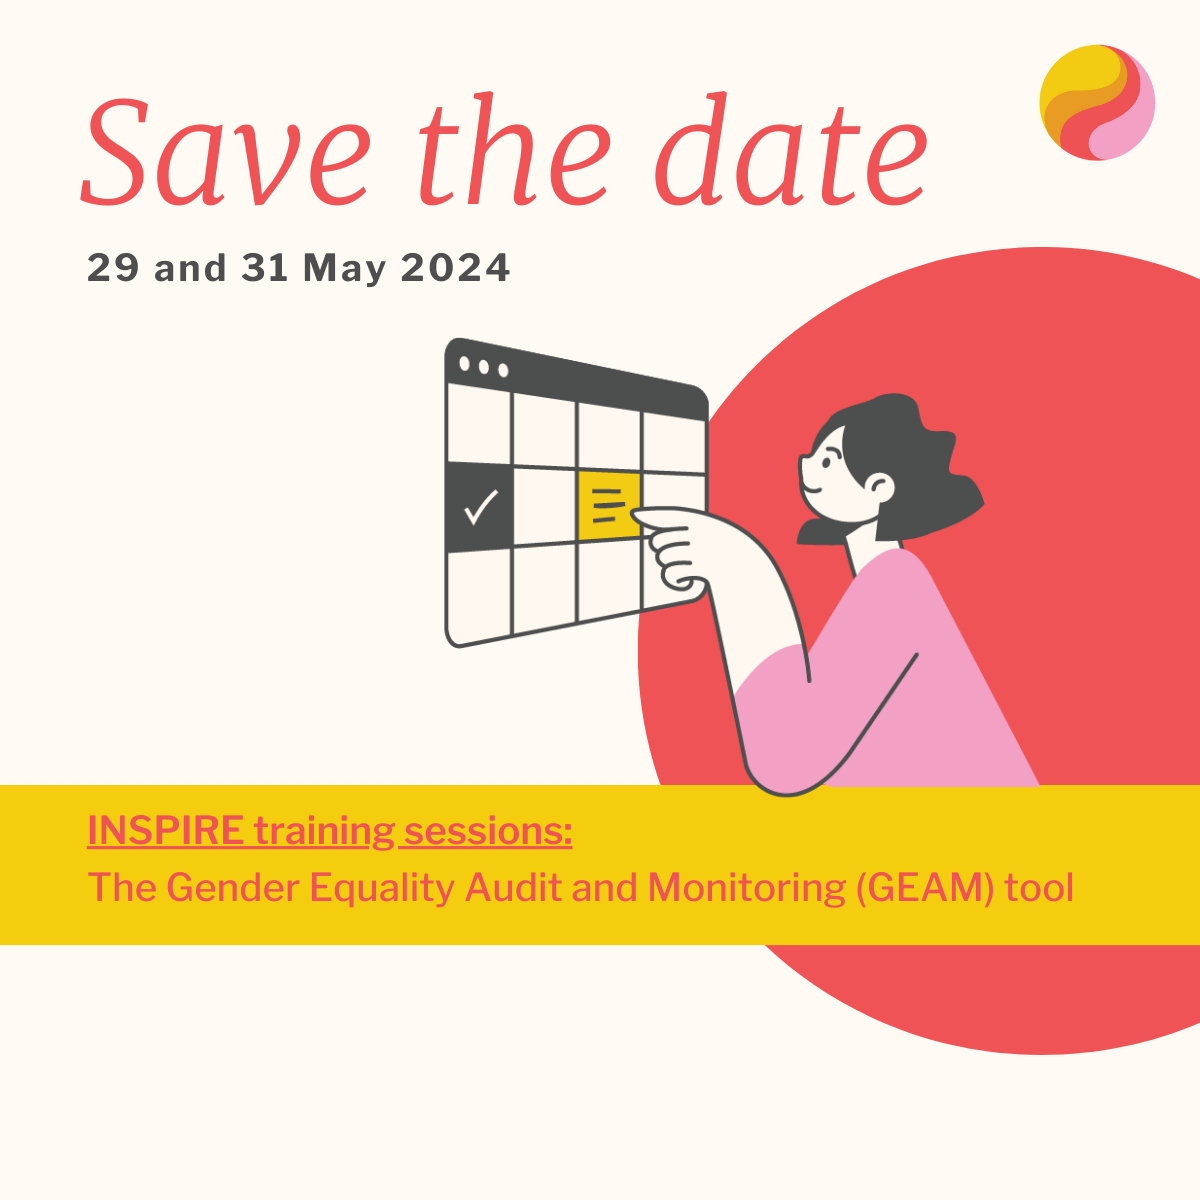 Save the date: 29 and 31 May 2024, INSPIRE training sessions